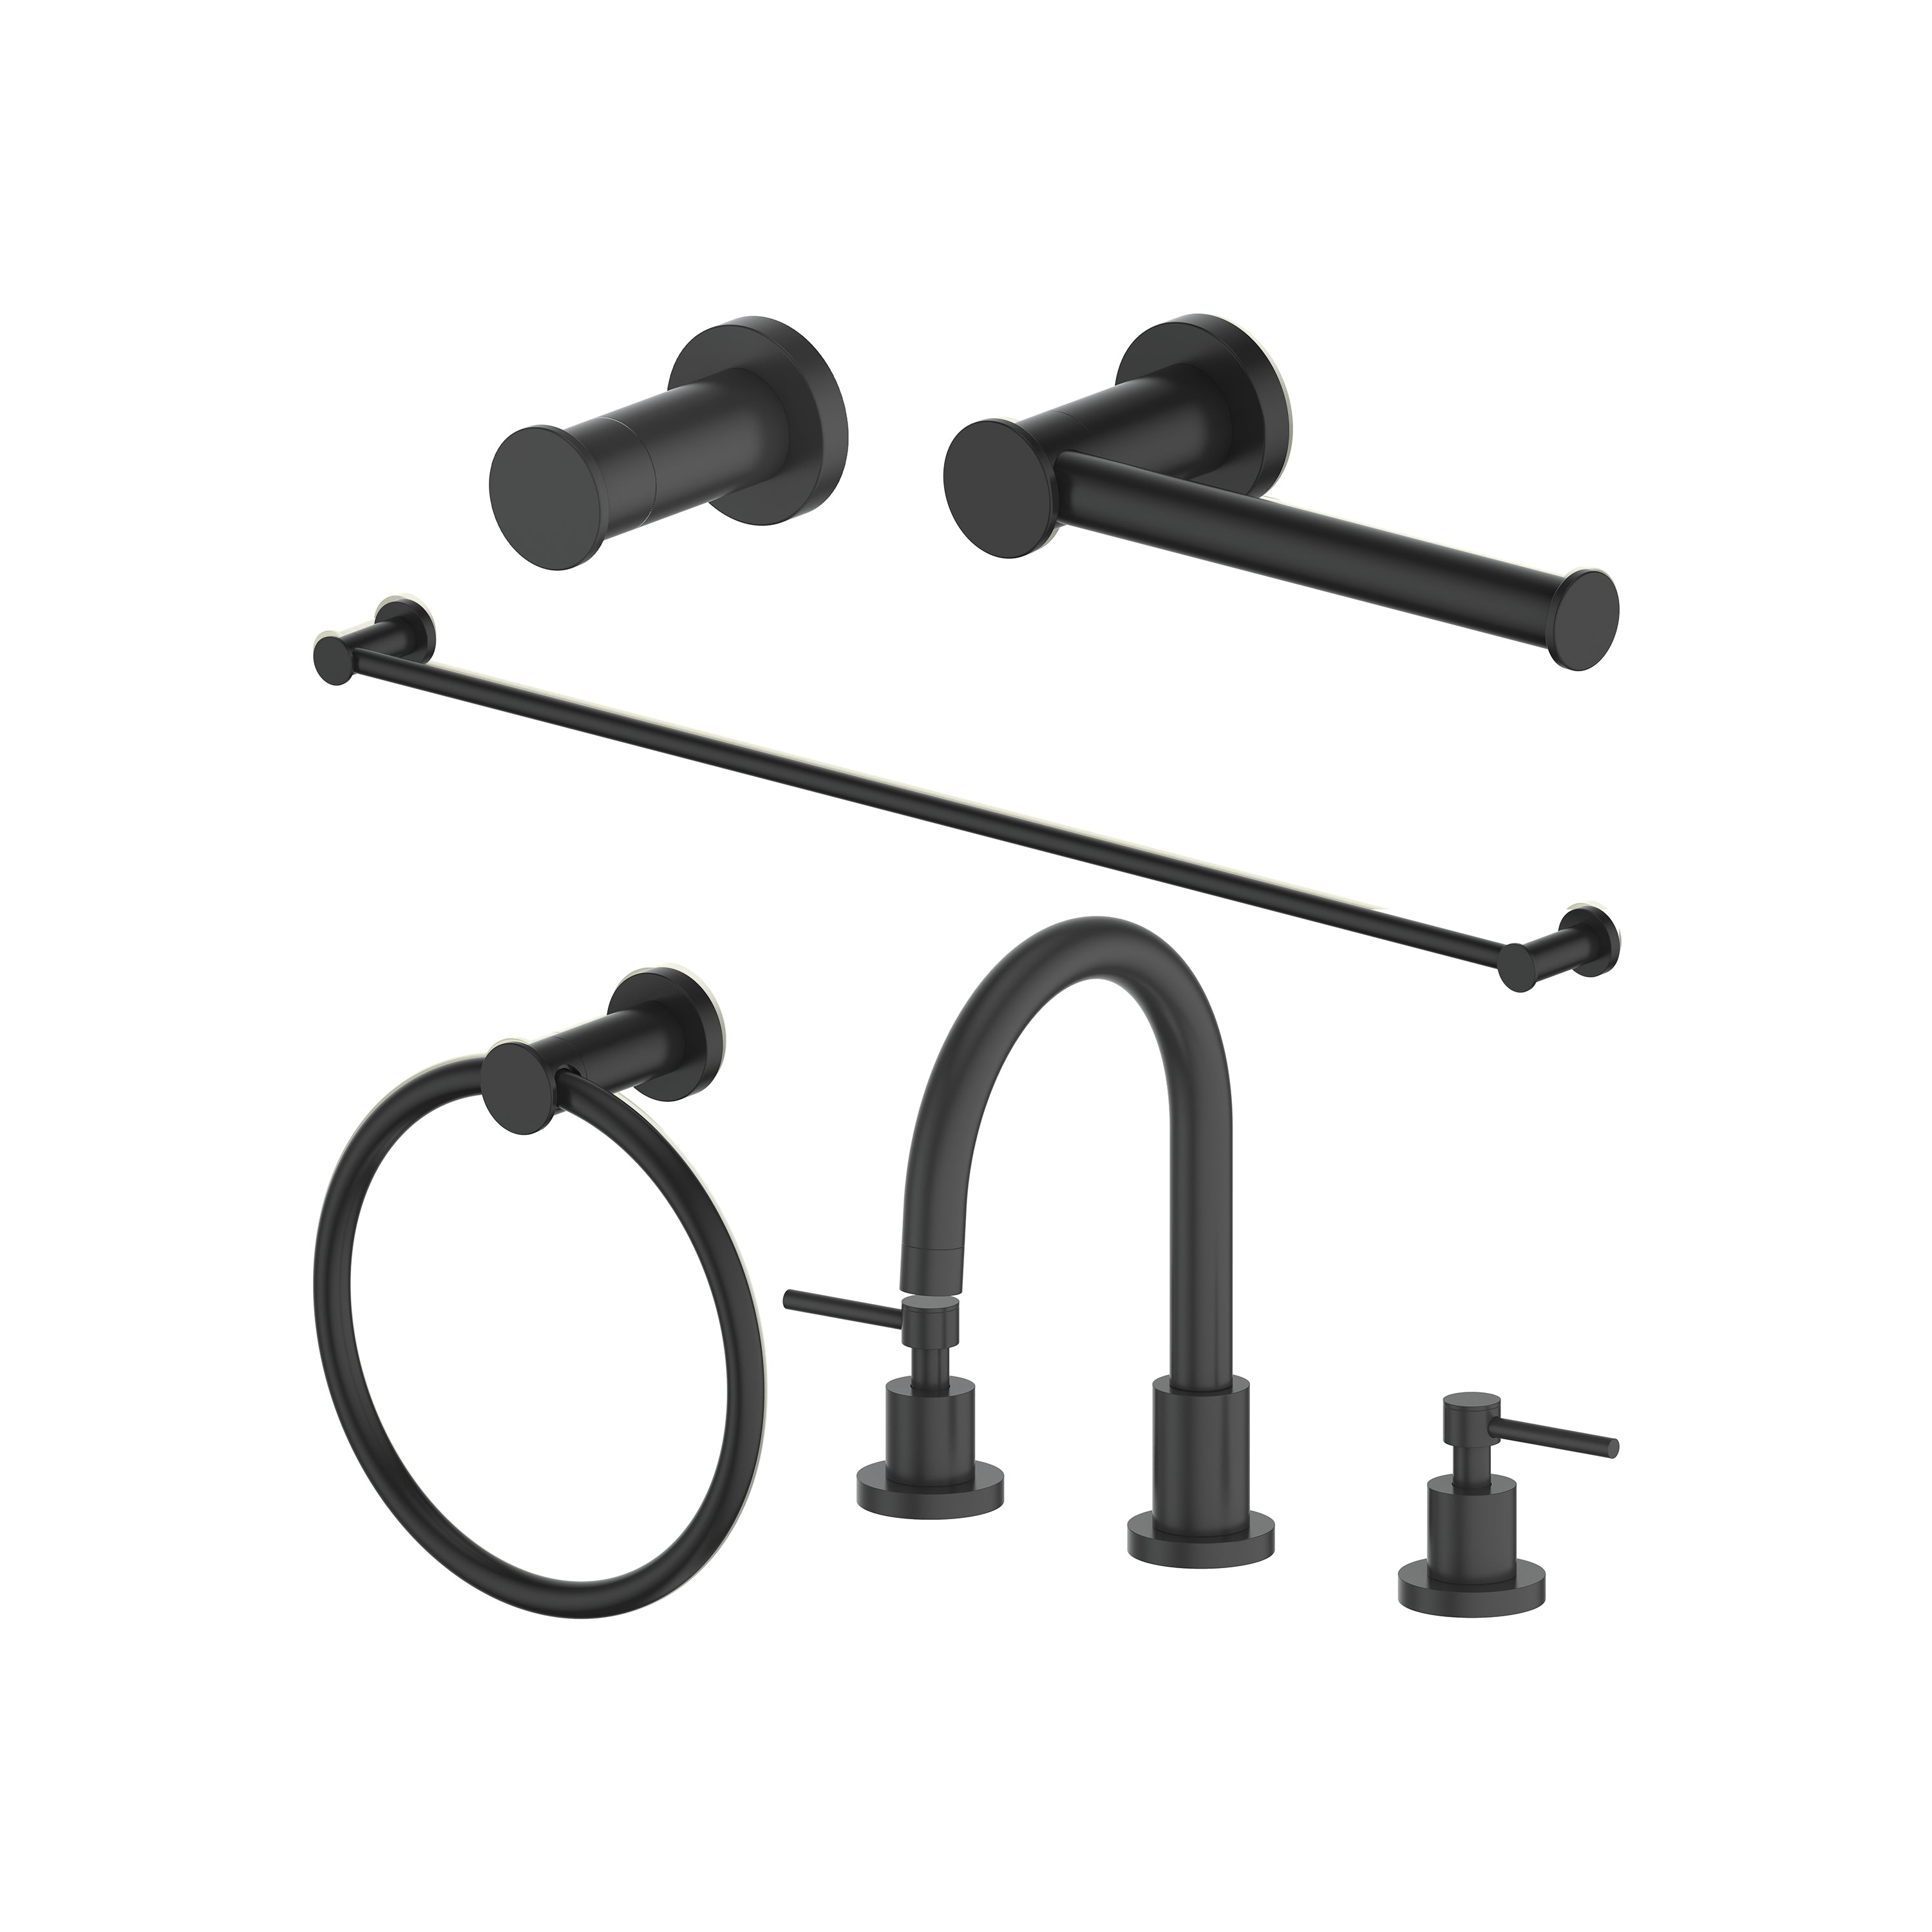 ZLINE Emerald Bay Bathroom Package with Faucet, Towel Rail, Hook, Ring and Toilet Paper Holder with Color Options (5BP-EMBYACCF)